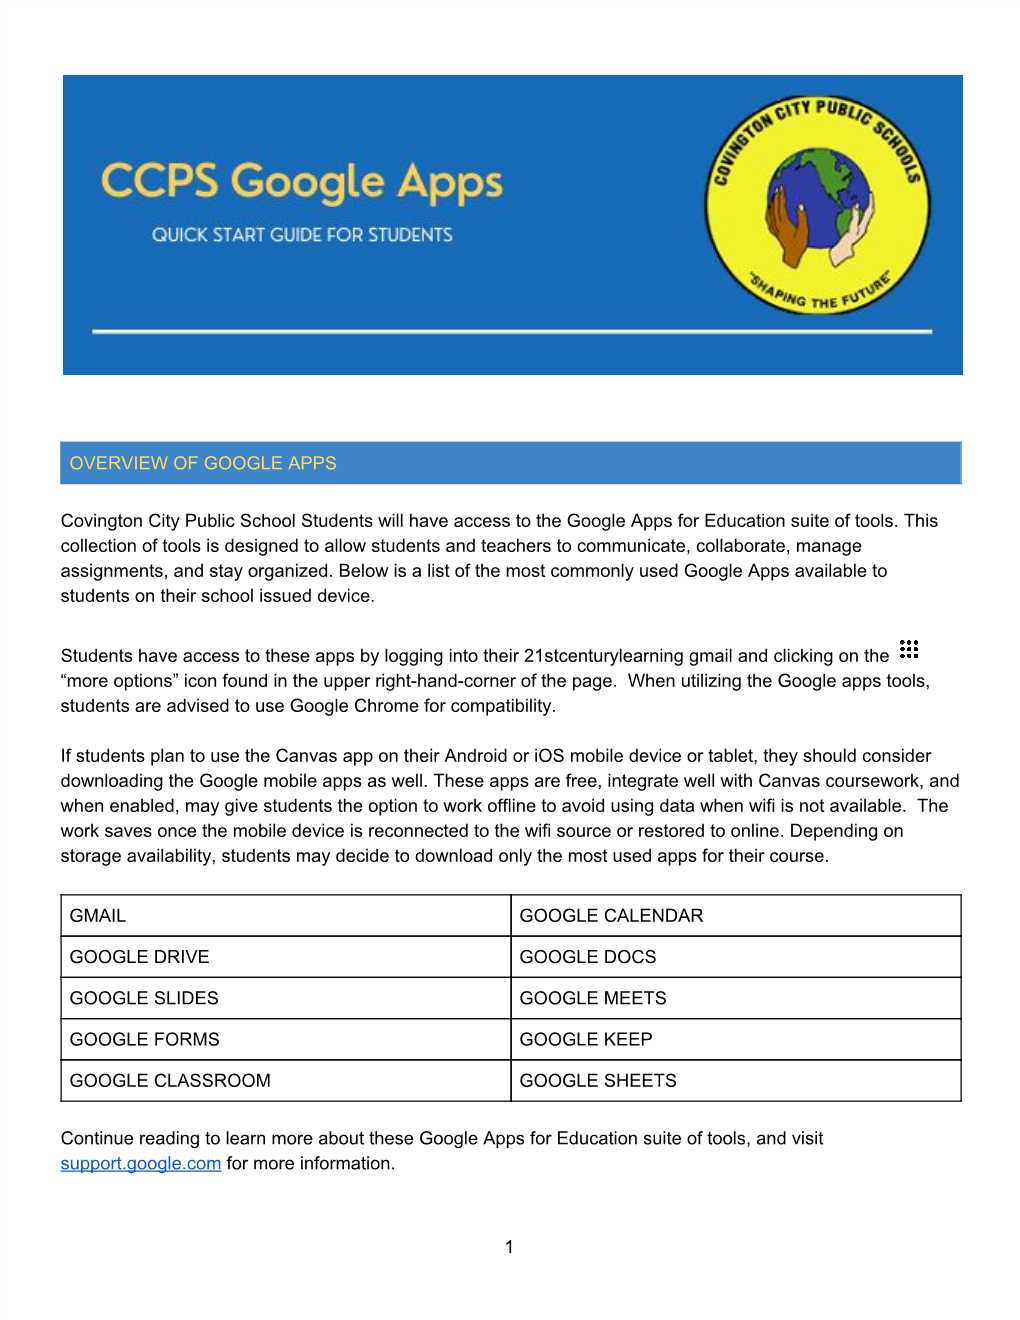 GOOGLE Apps for Students